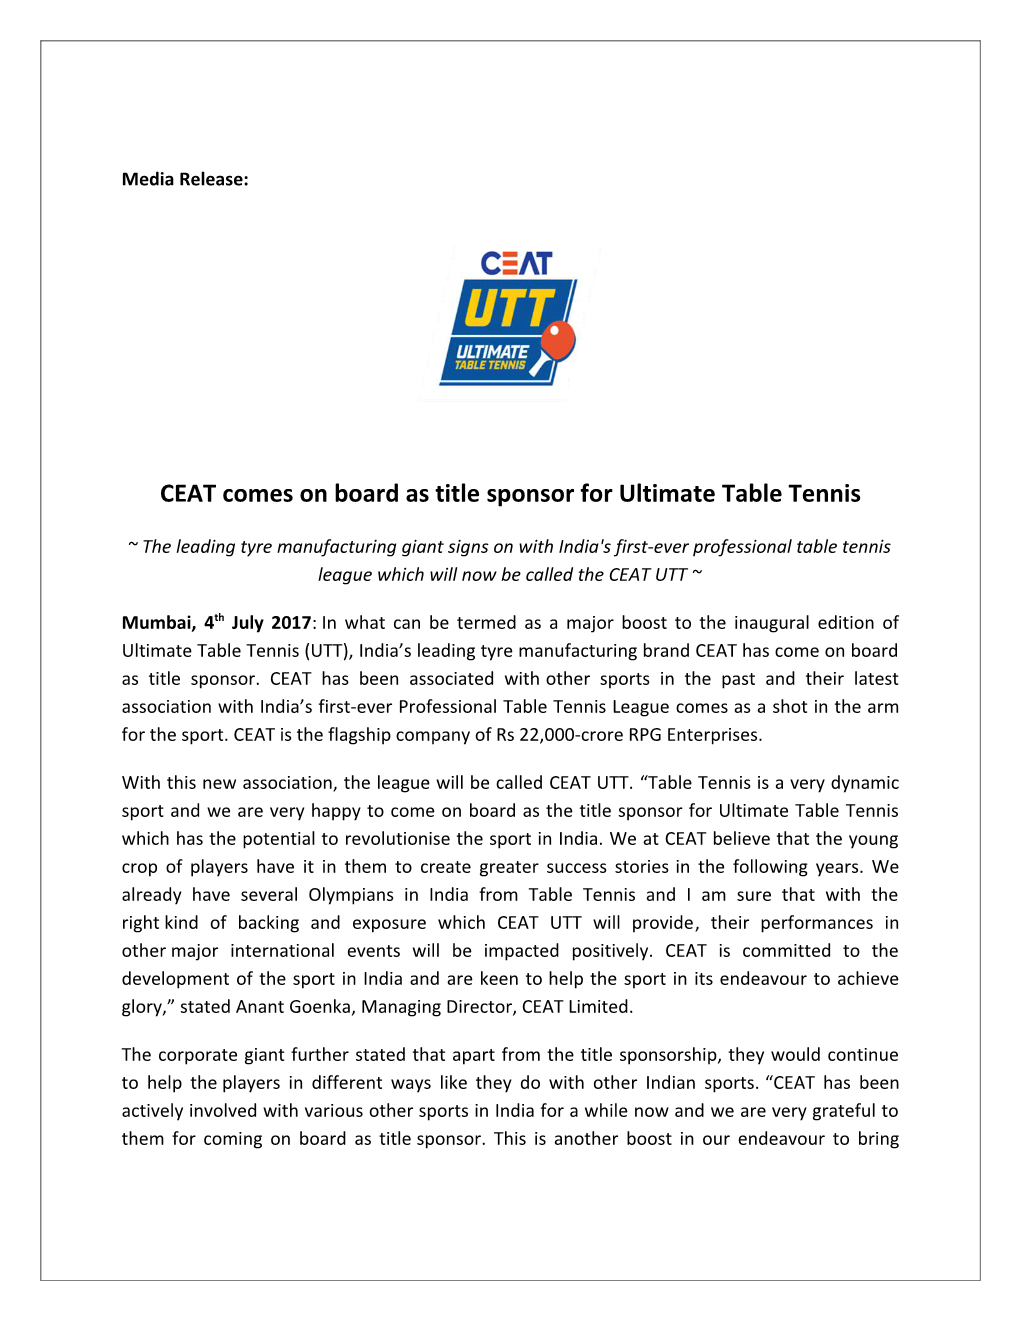 CEAT Comes on Board As Title Sponsor for Ultimate Table Tennis